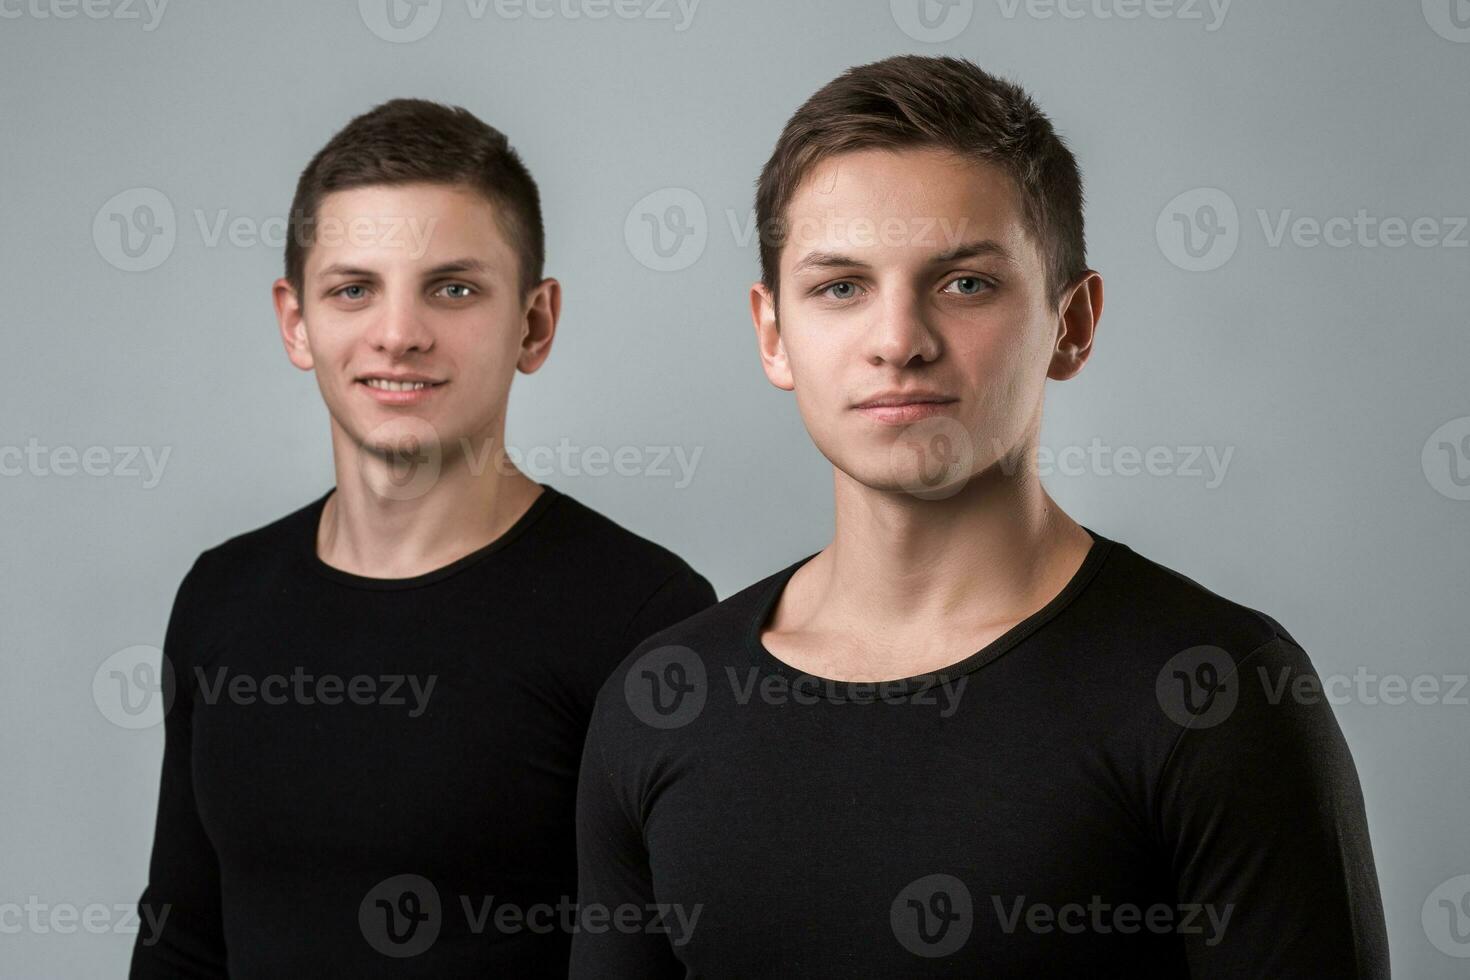 The two twin brother stand on the gray background photo